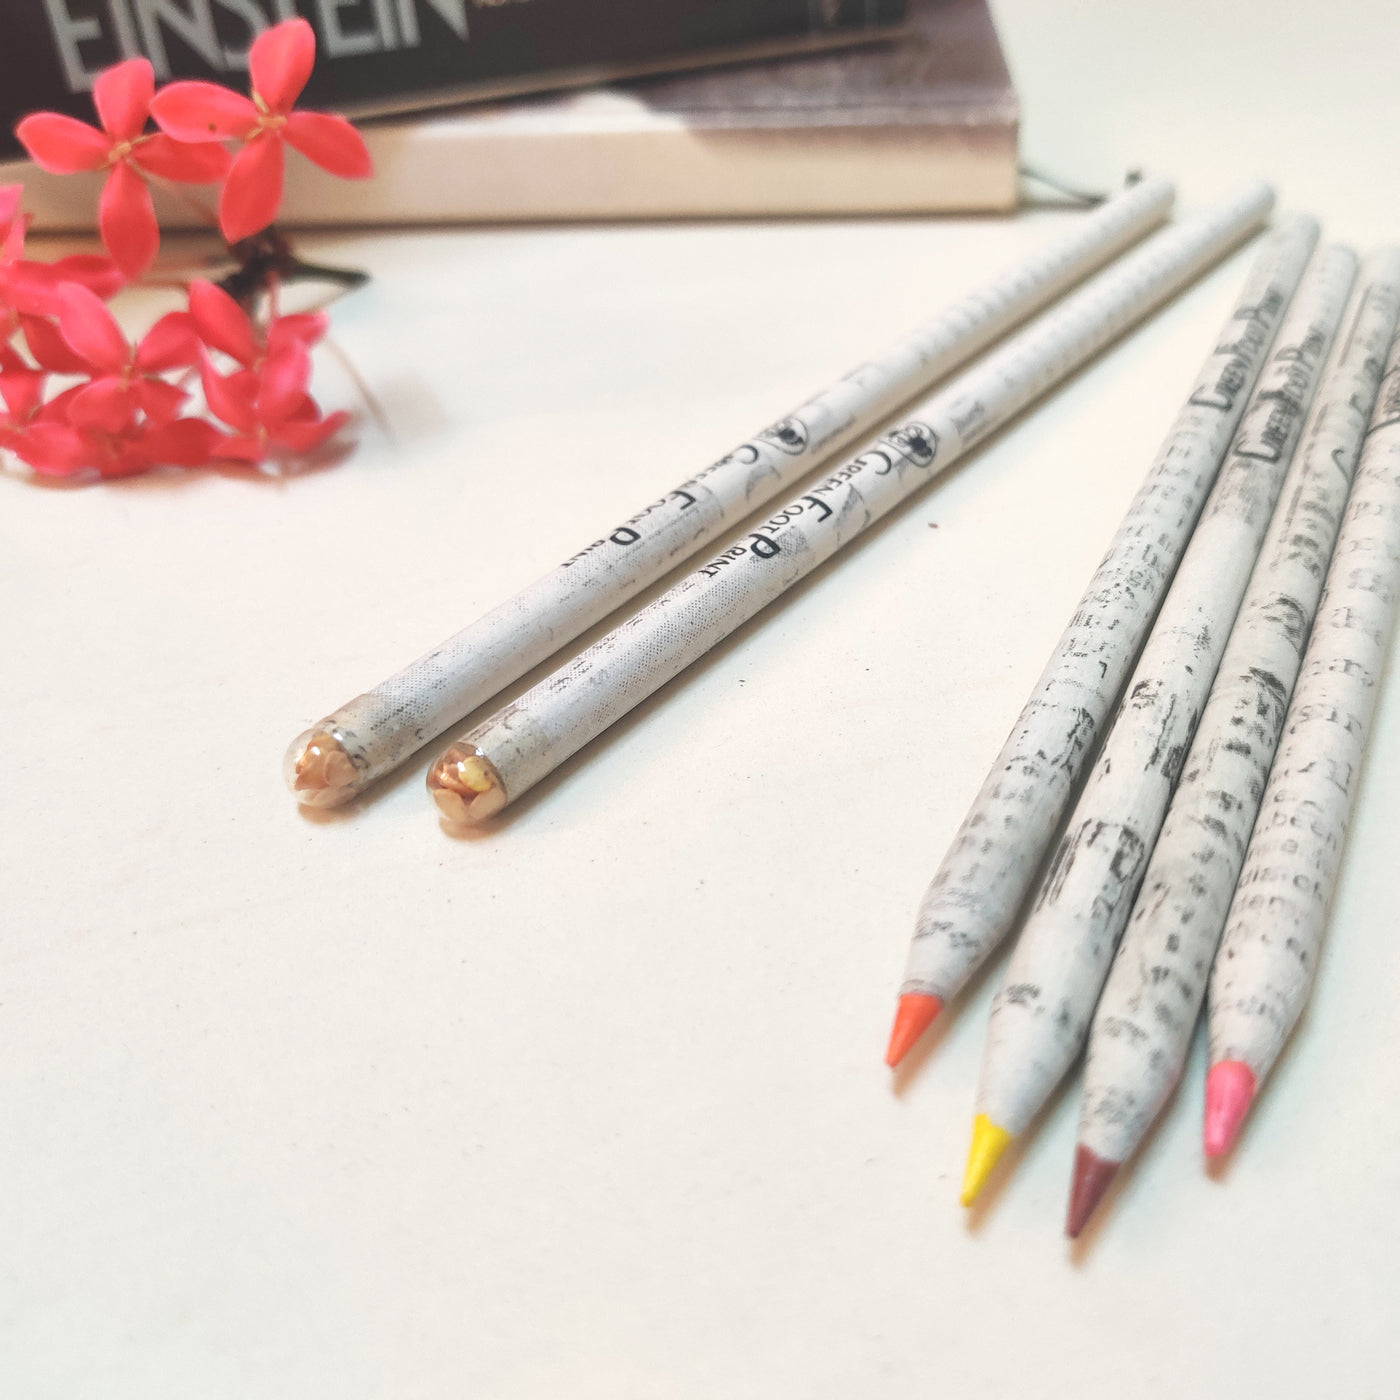 Stationery Kit | Plantable Note Book | Paper Pencils | Seed Colour Pencils